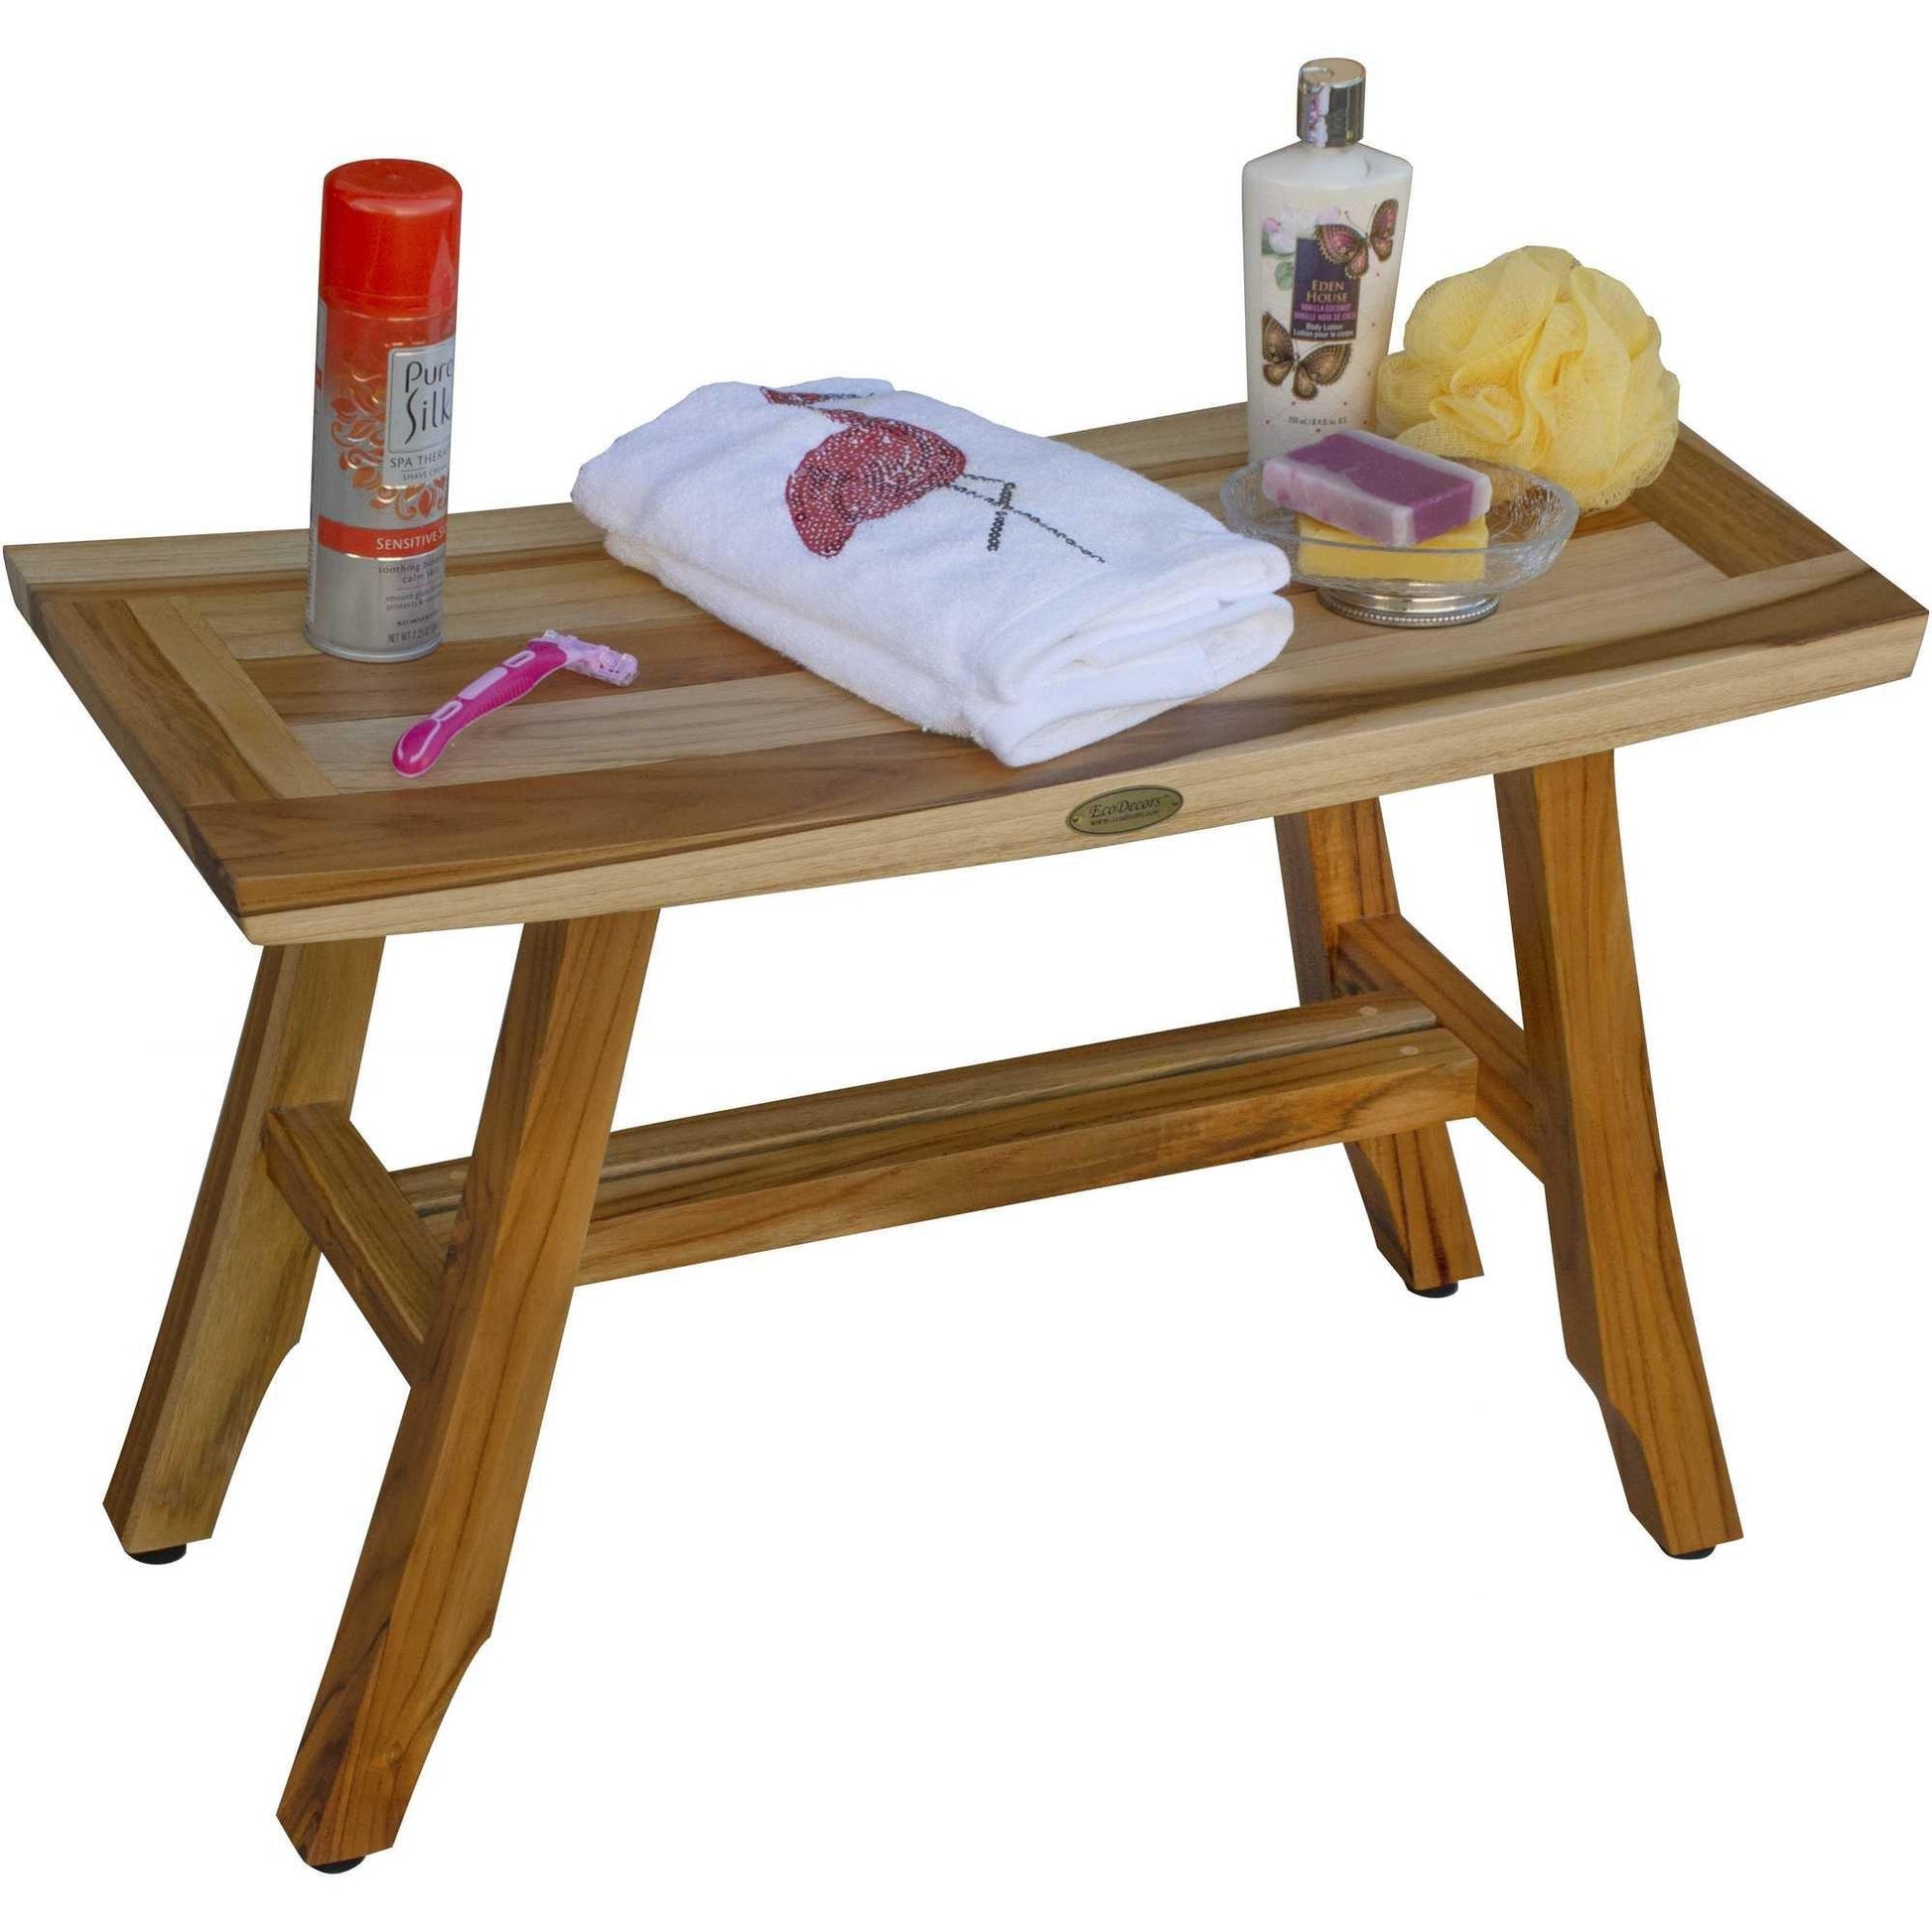 Contemporary Teak Shower Bench in Natural Finish - AFS